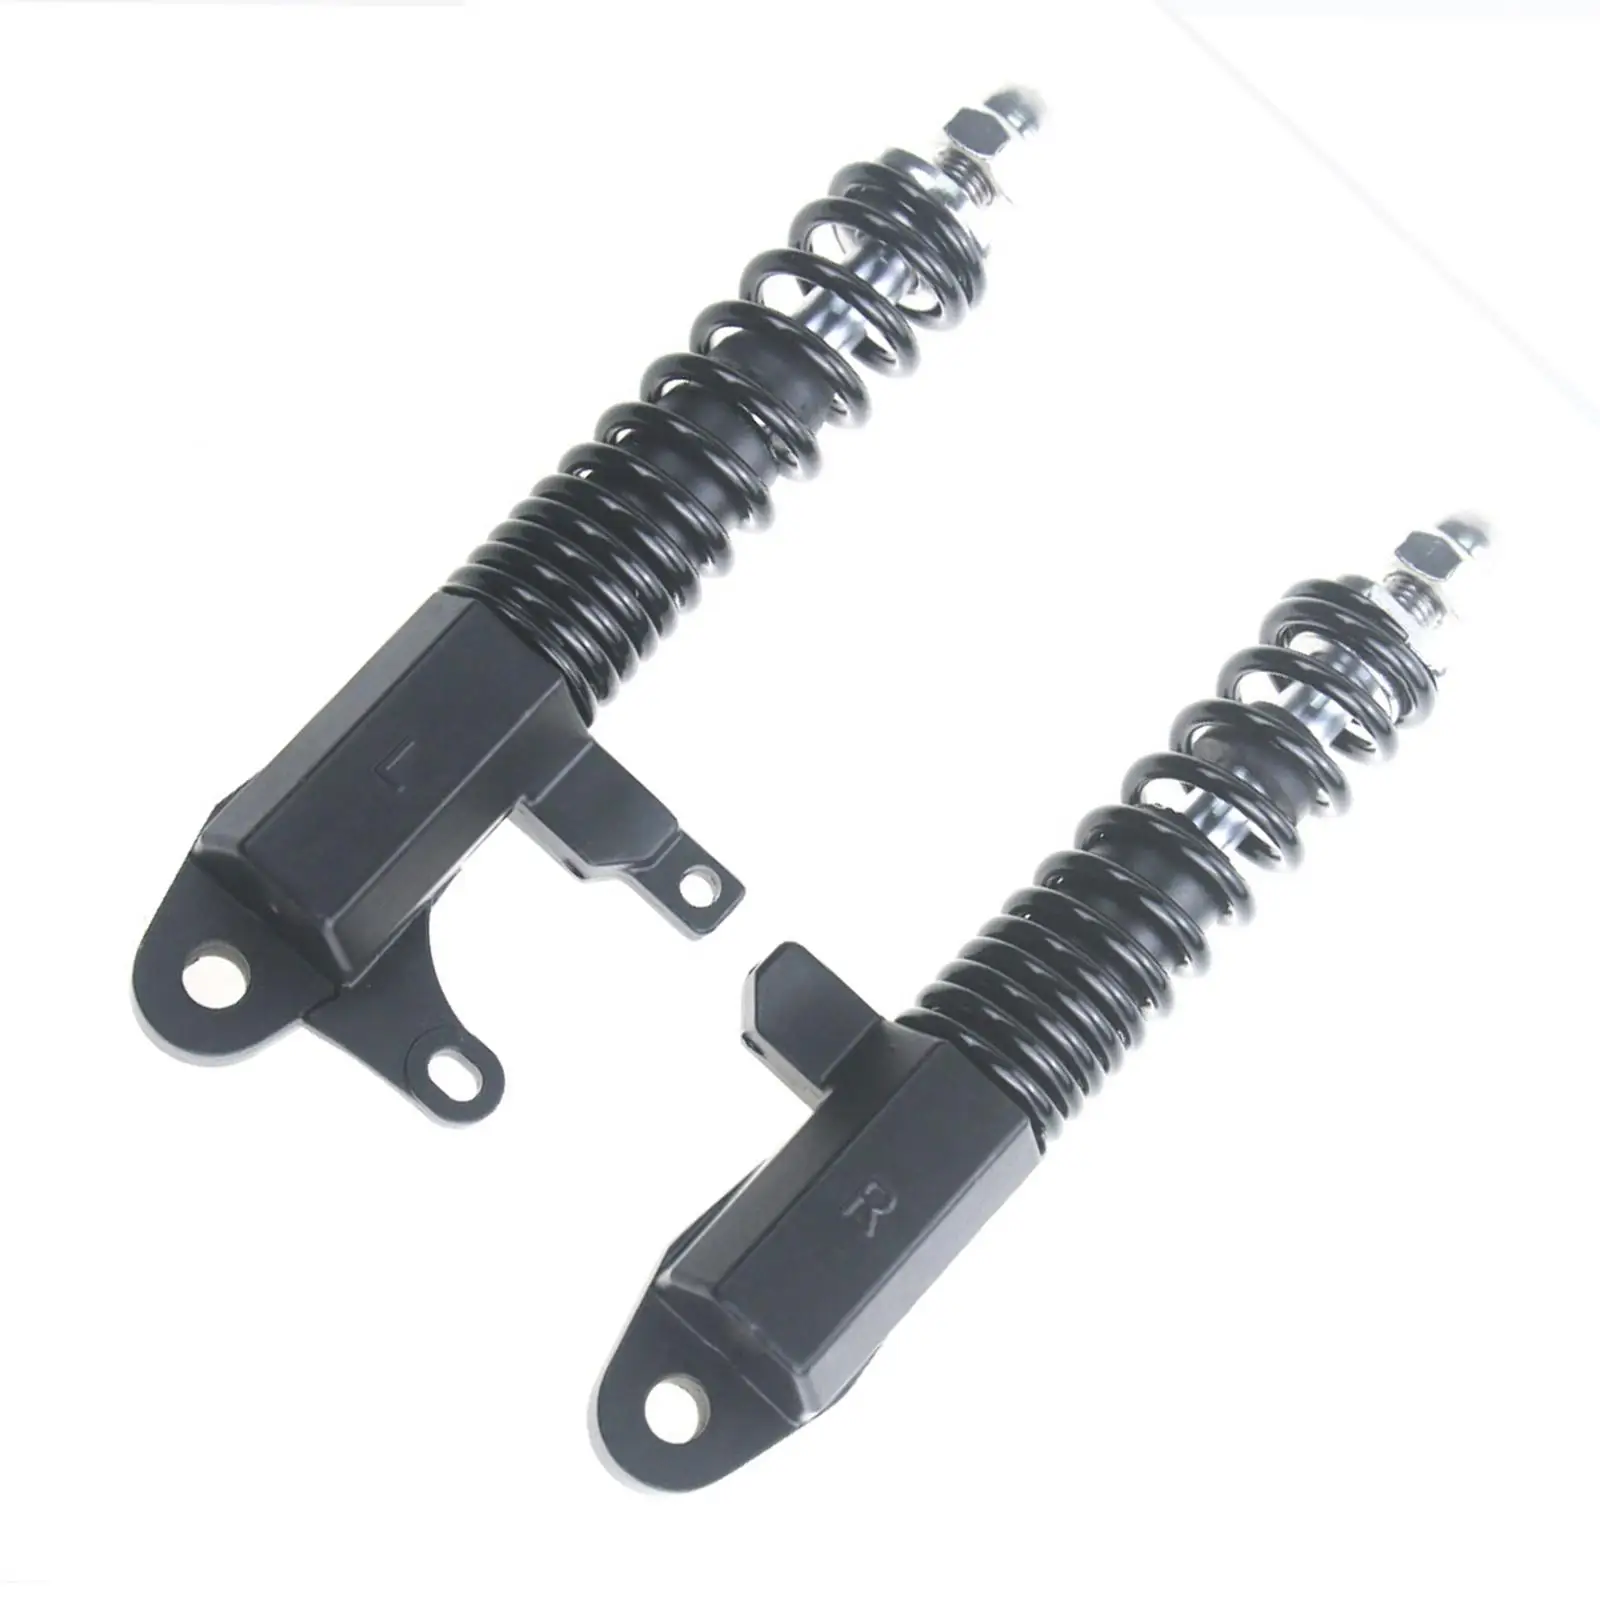 2Pcs Front Fork Hydraulic Shock Absorber Left and Right Adjustable Premium